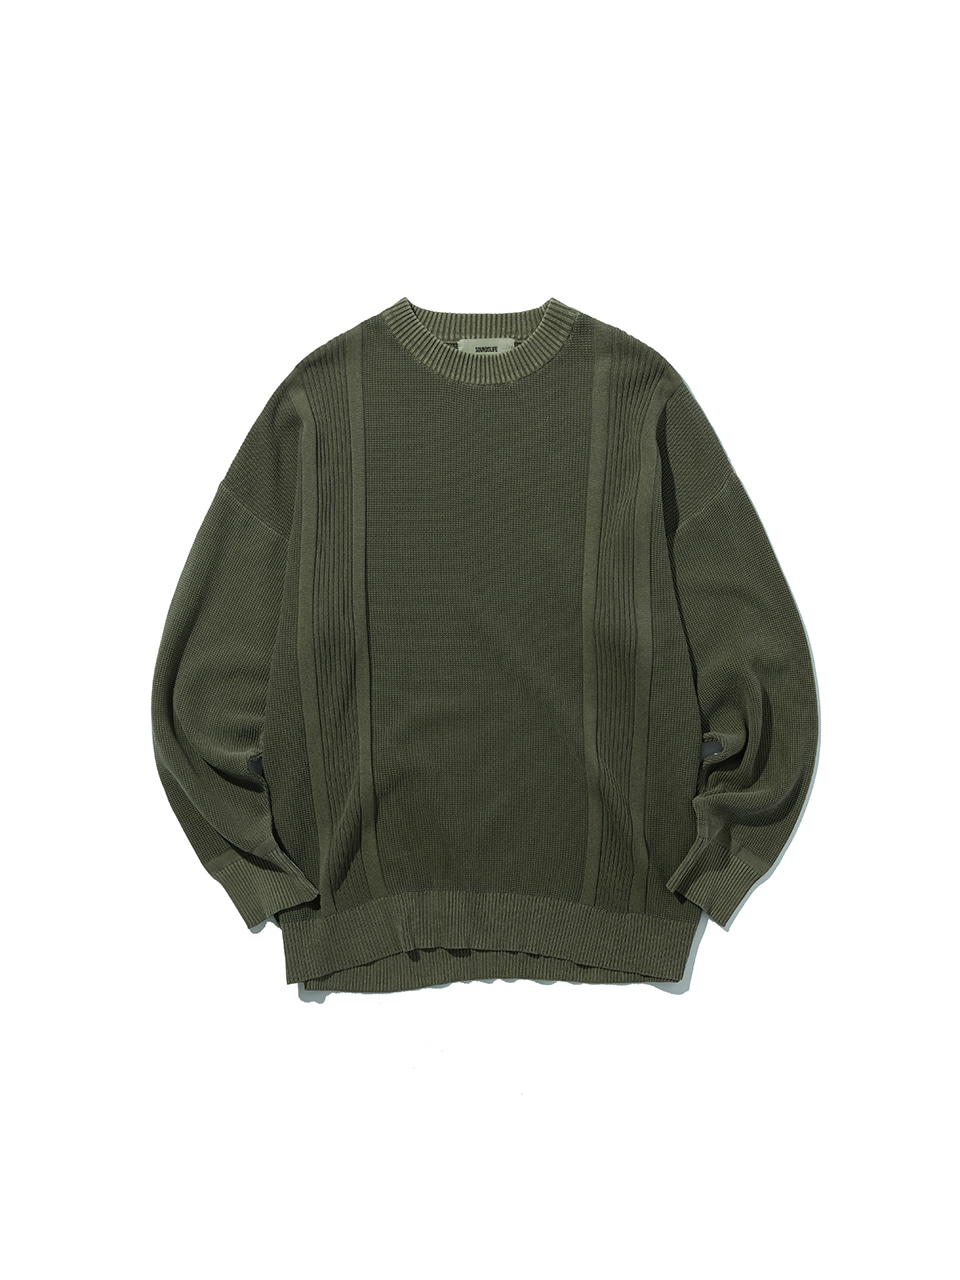 SOUNDSLIFE - Double Faced Pullover Knit Khaki